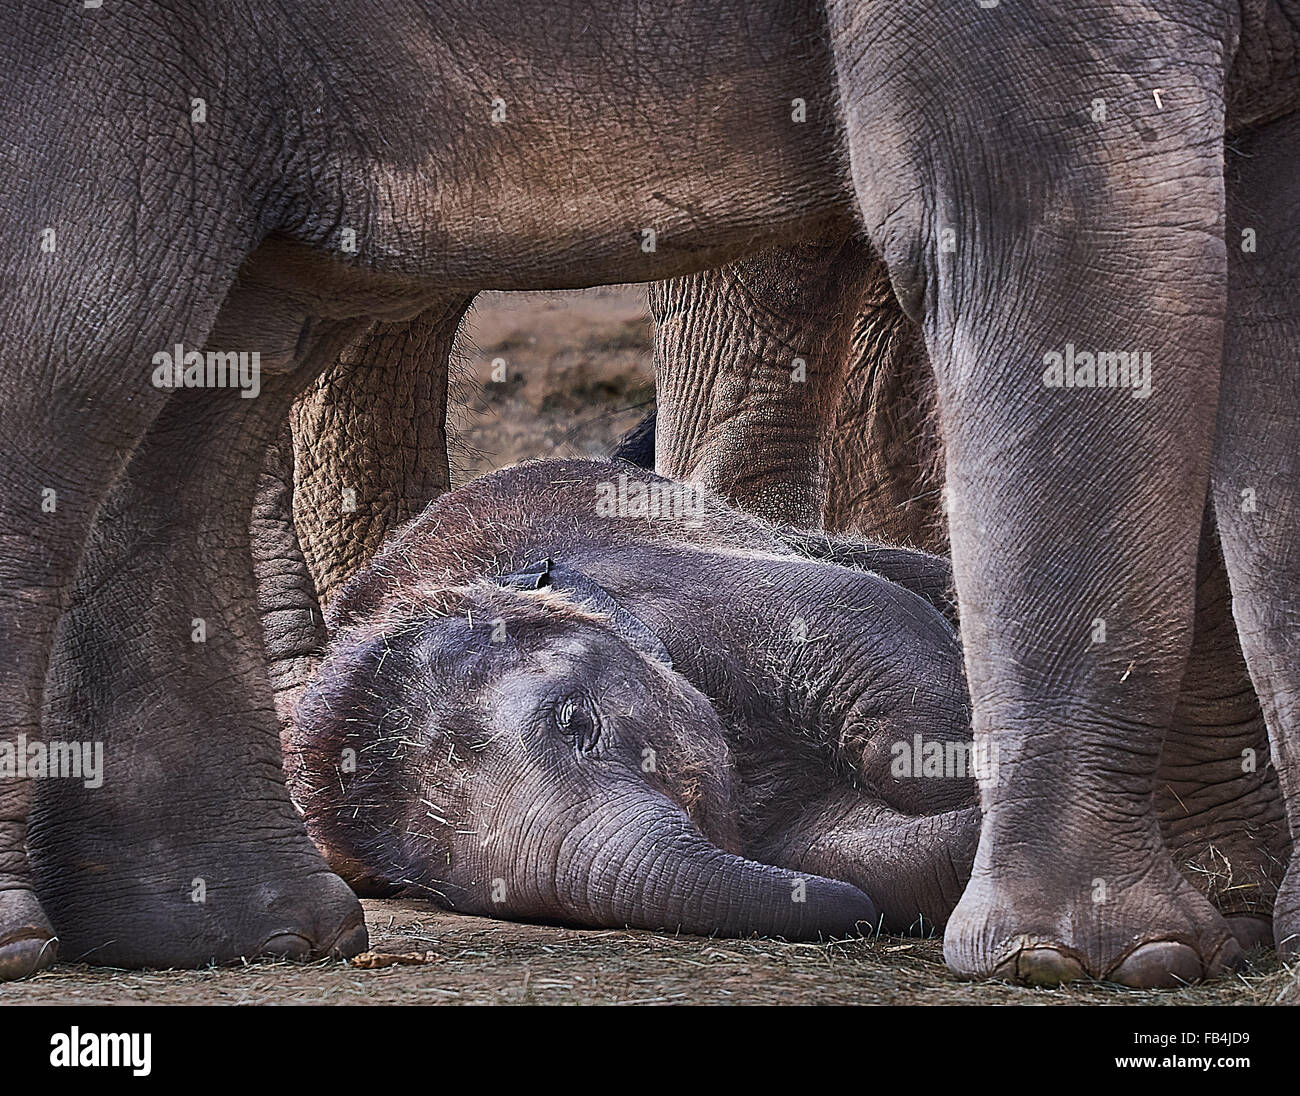 Baby Asian elephant relaxed underneath its mother Stock Photo